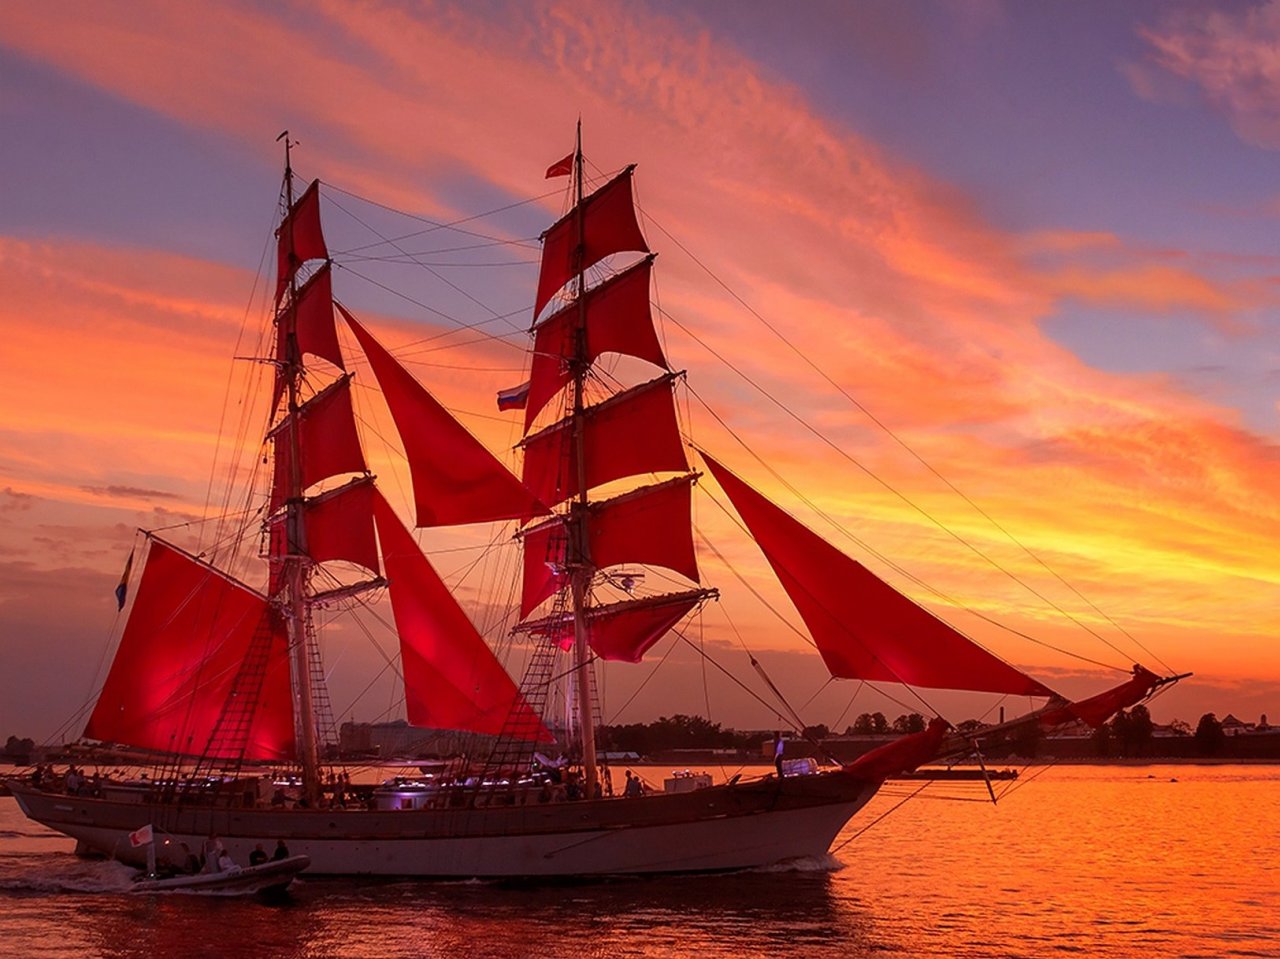 The Scarlet Sails, St. Petersburg jigsaw puzzle